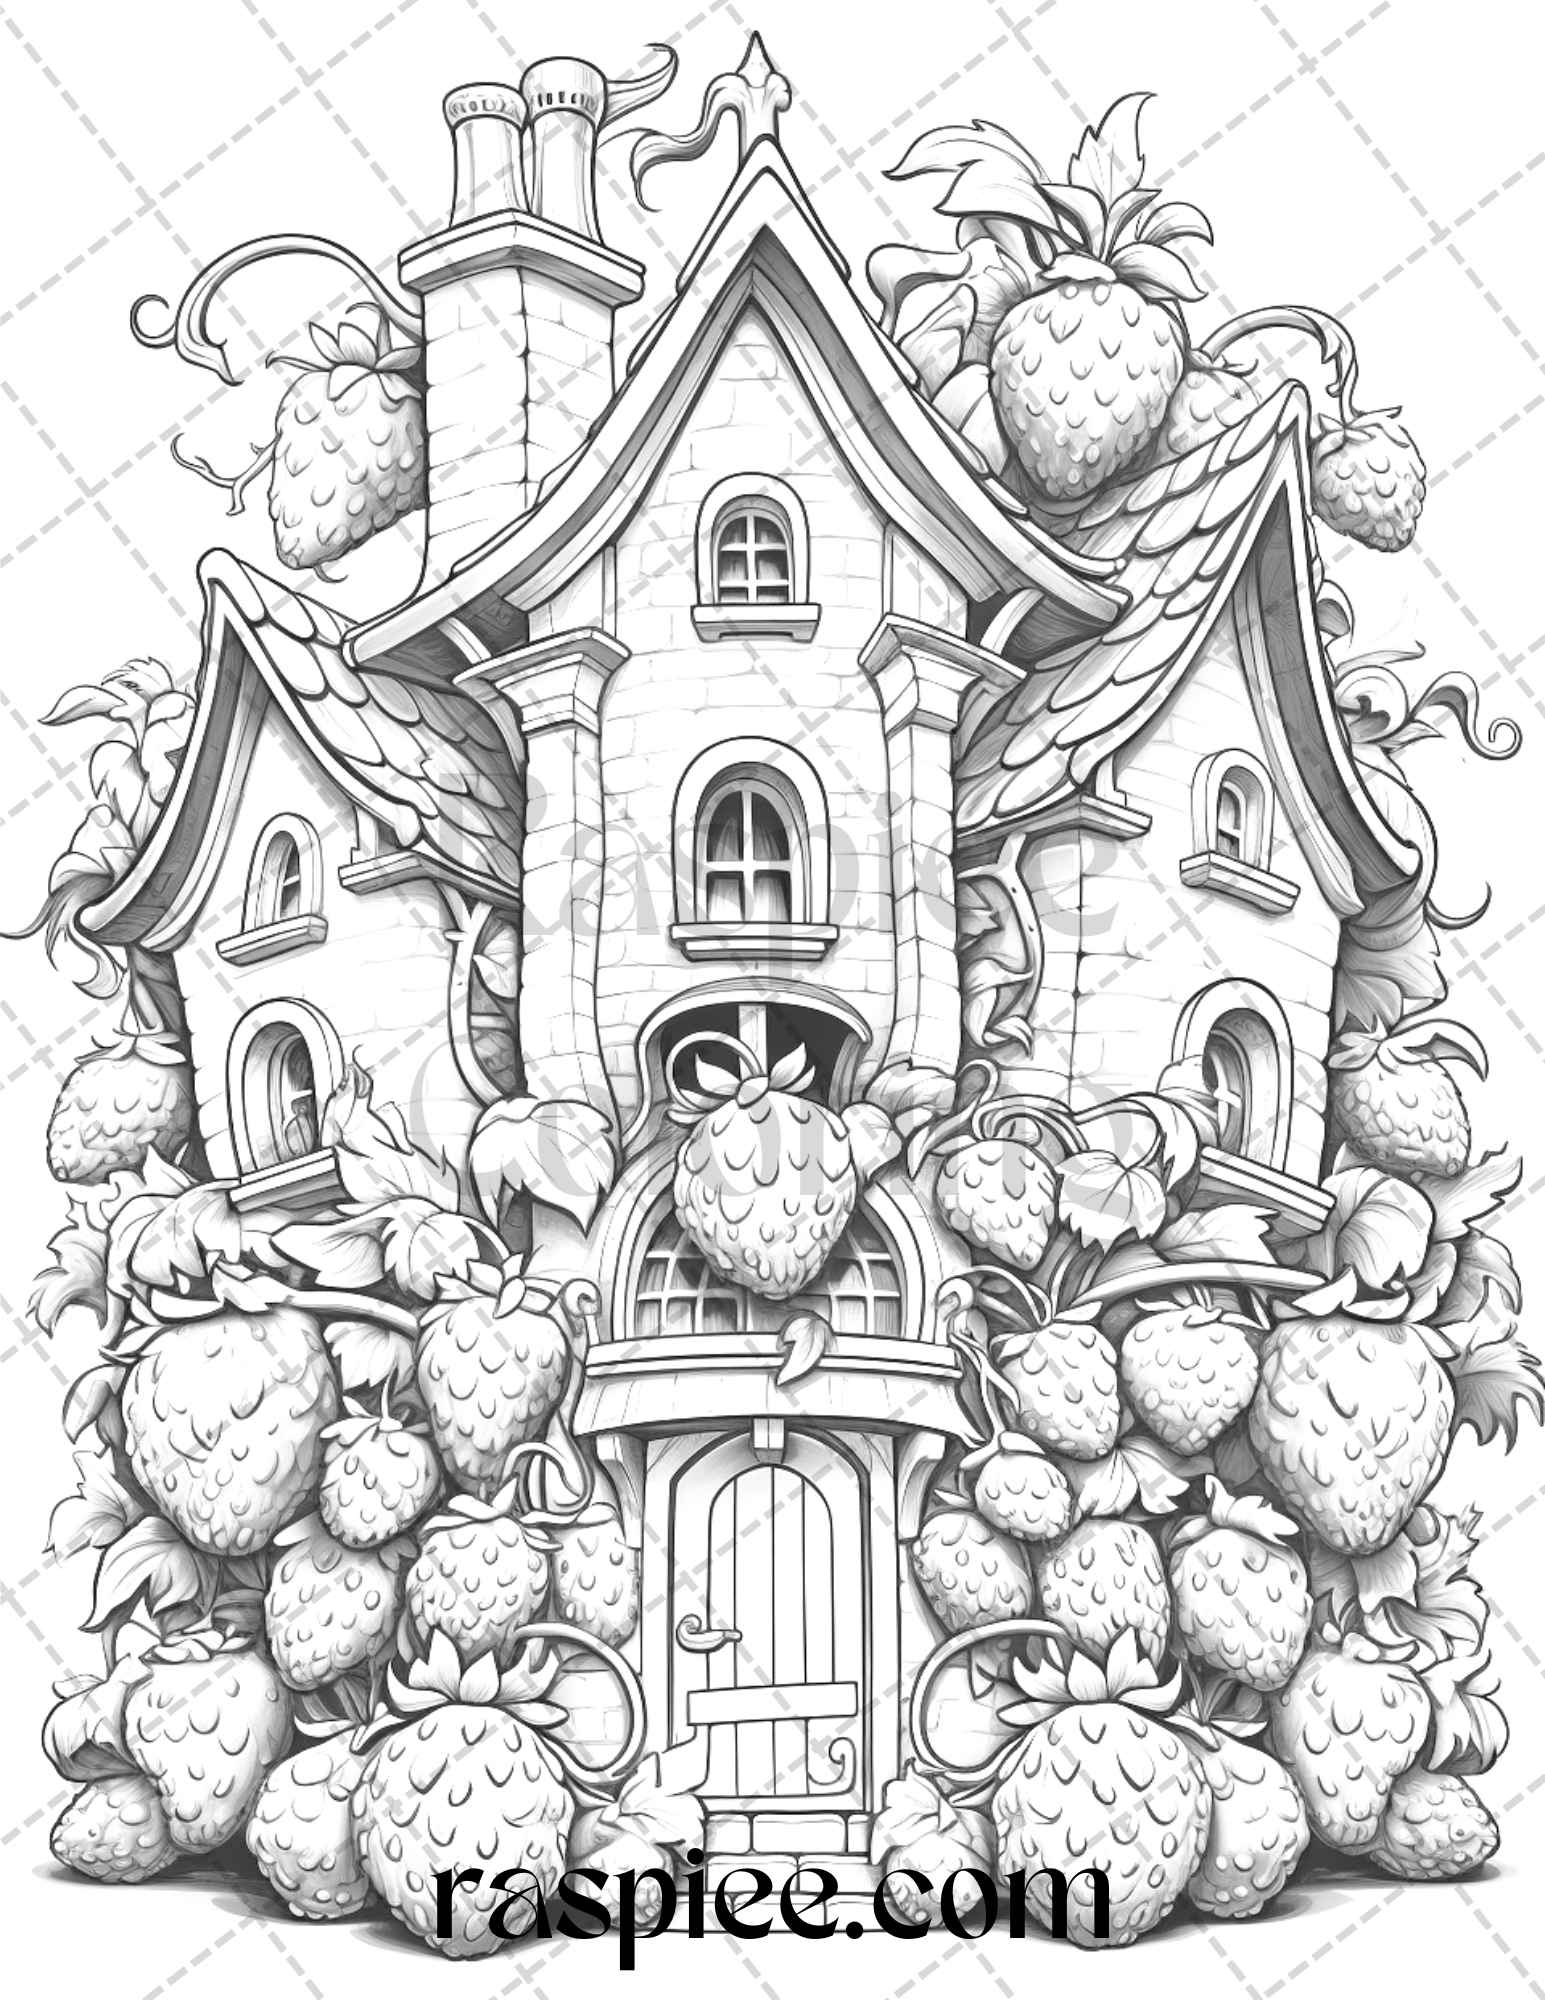 50 Strawberry Houses Grayscale Coloring Pages Printable for Adults Kids, PDF File Instant Download - raspiee